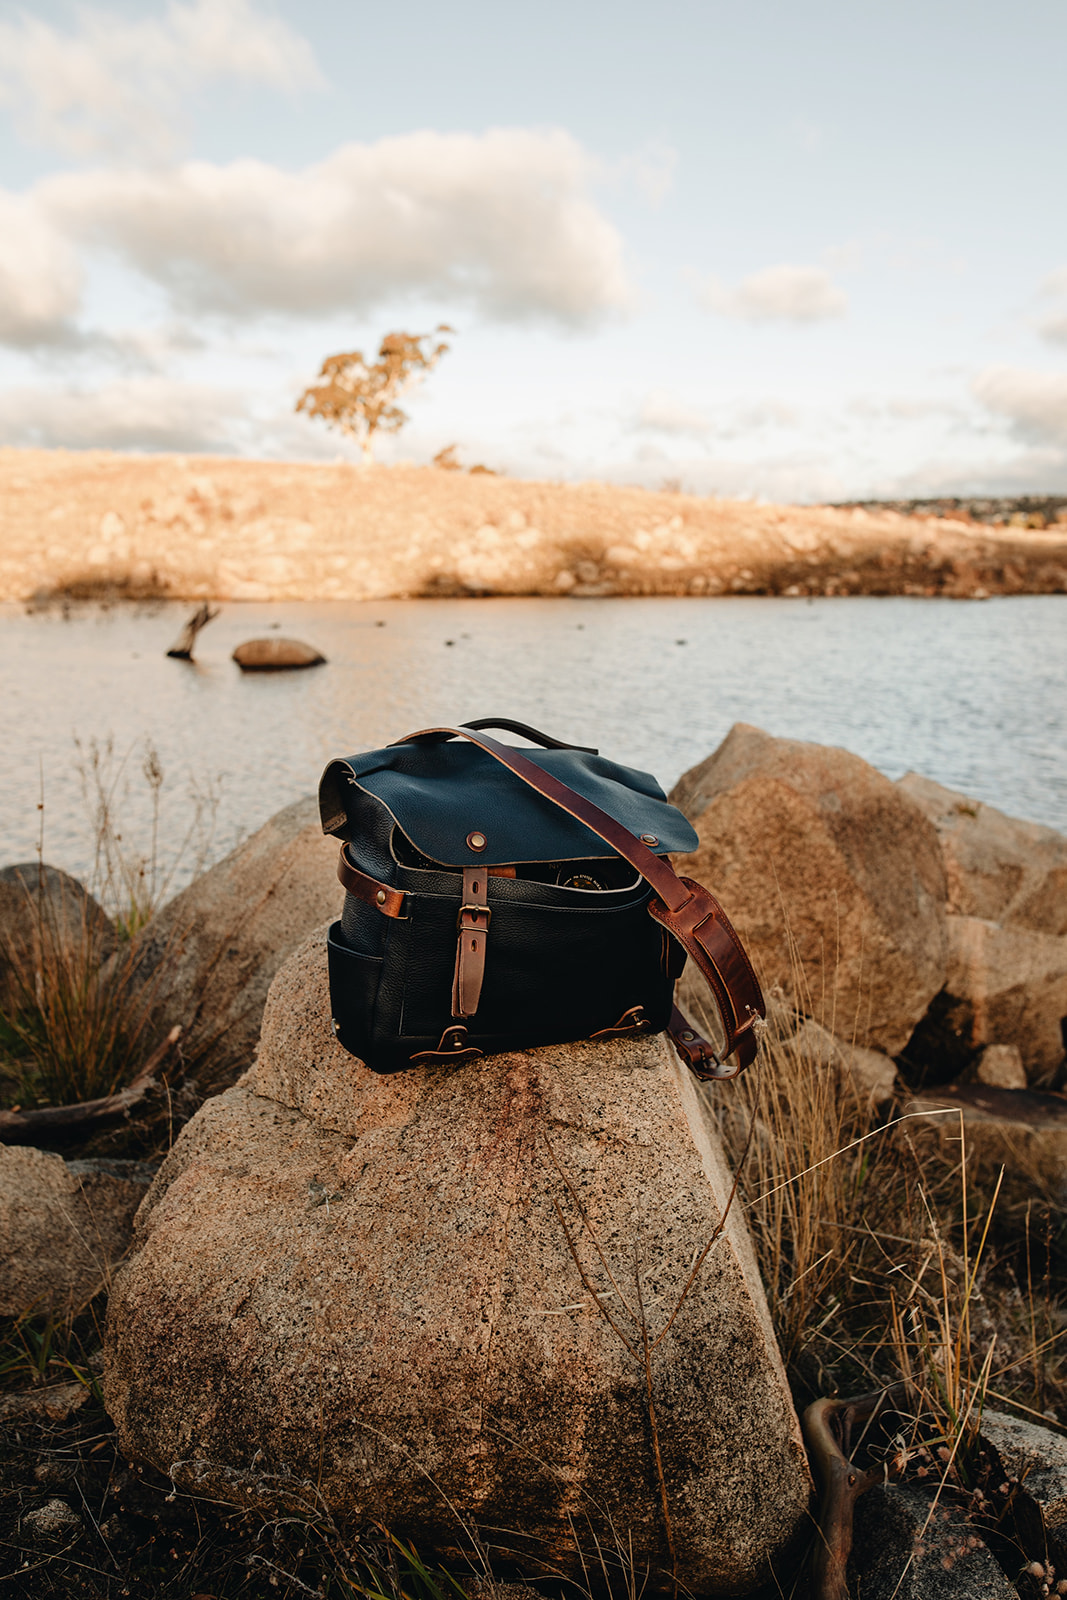 The Arles photo bag is on a rock in front of a lake